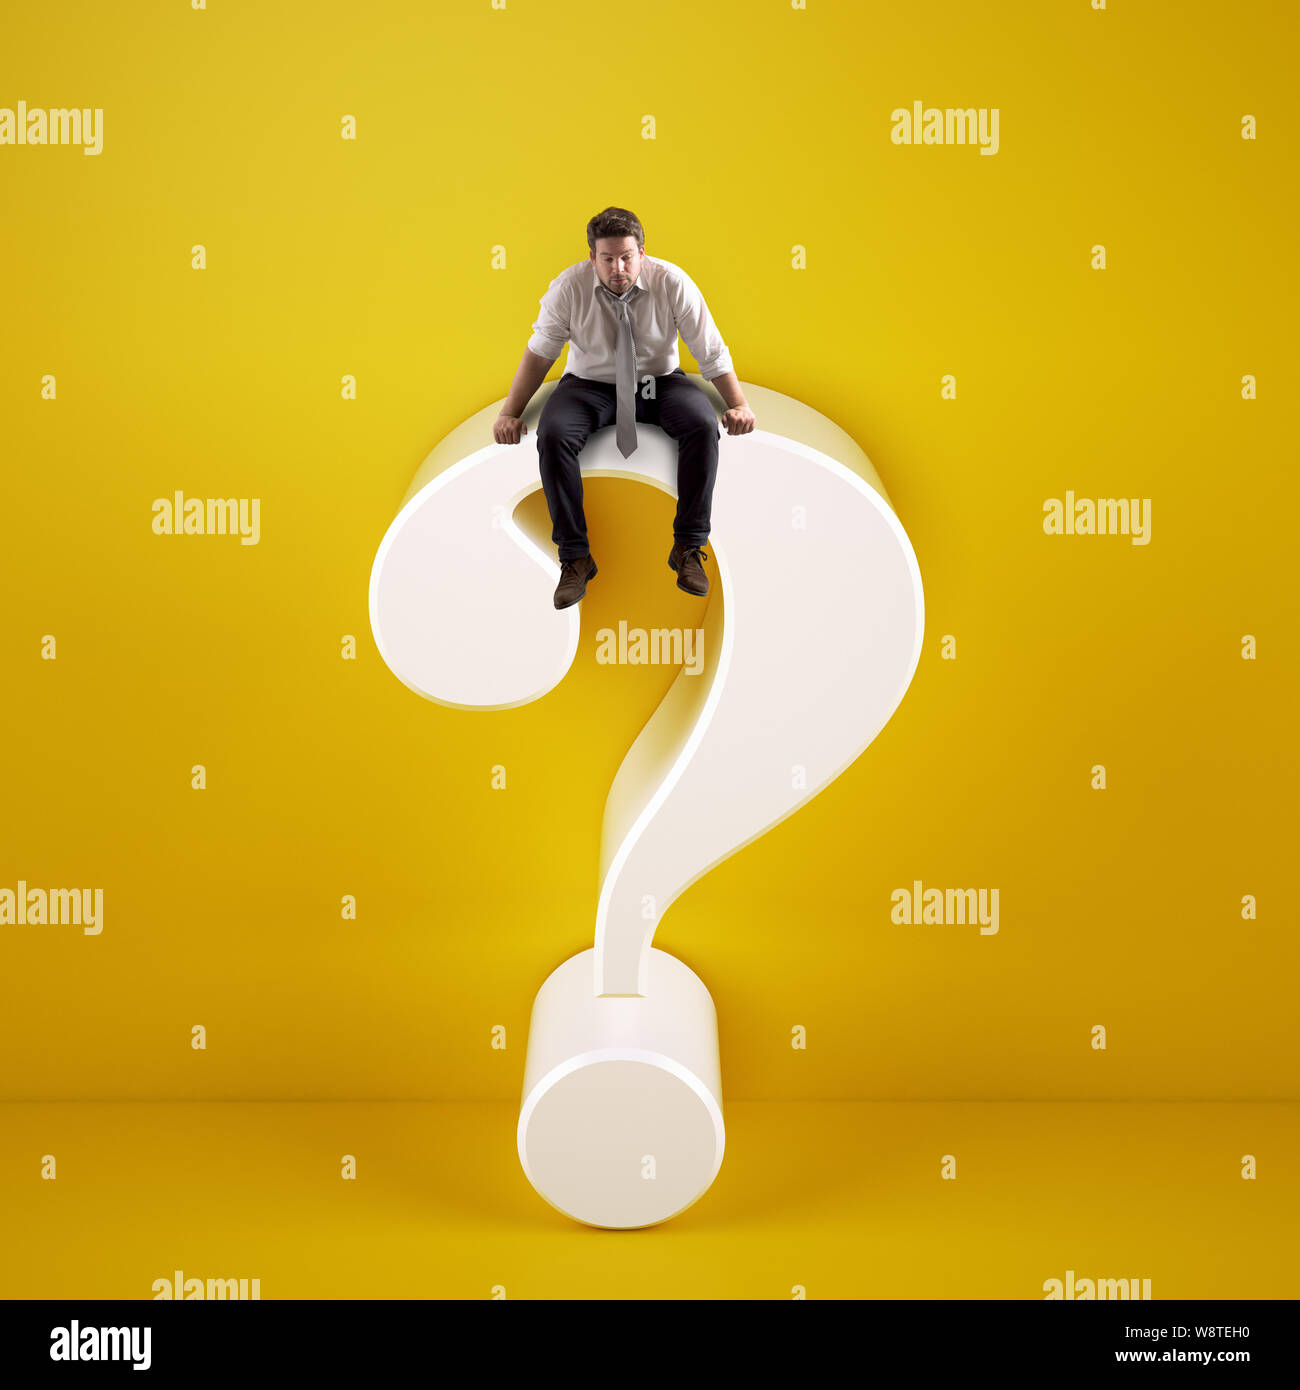 Man sitting on top of a big white question mark on a yellow background Stock Photo